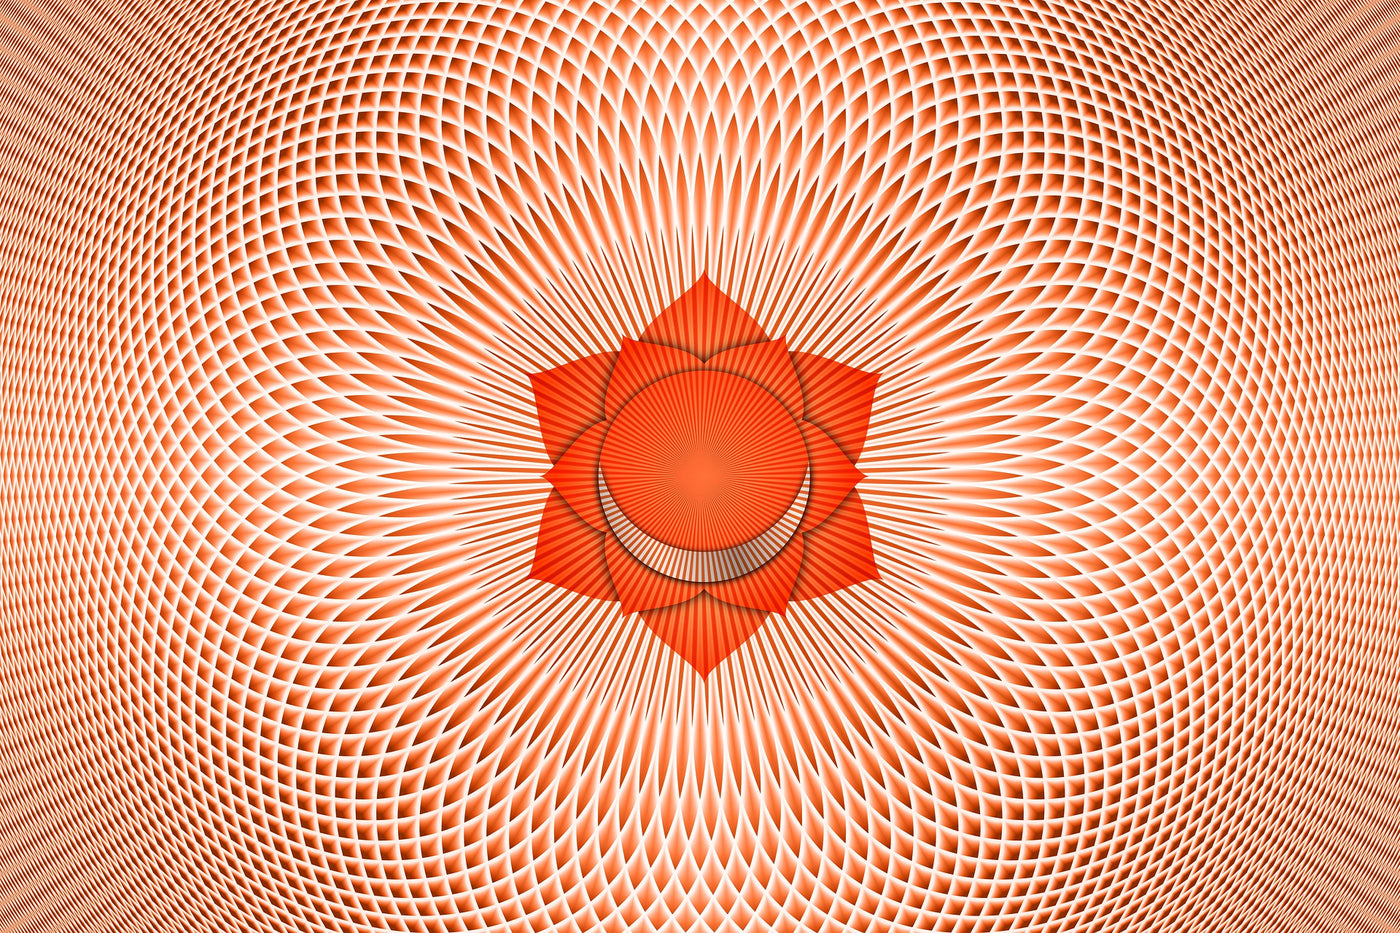 The Sacral Chakra Package